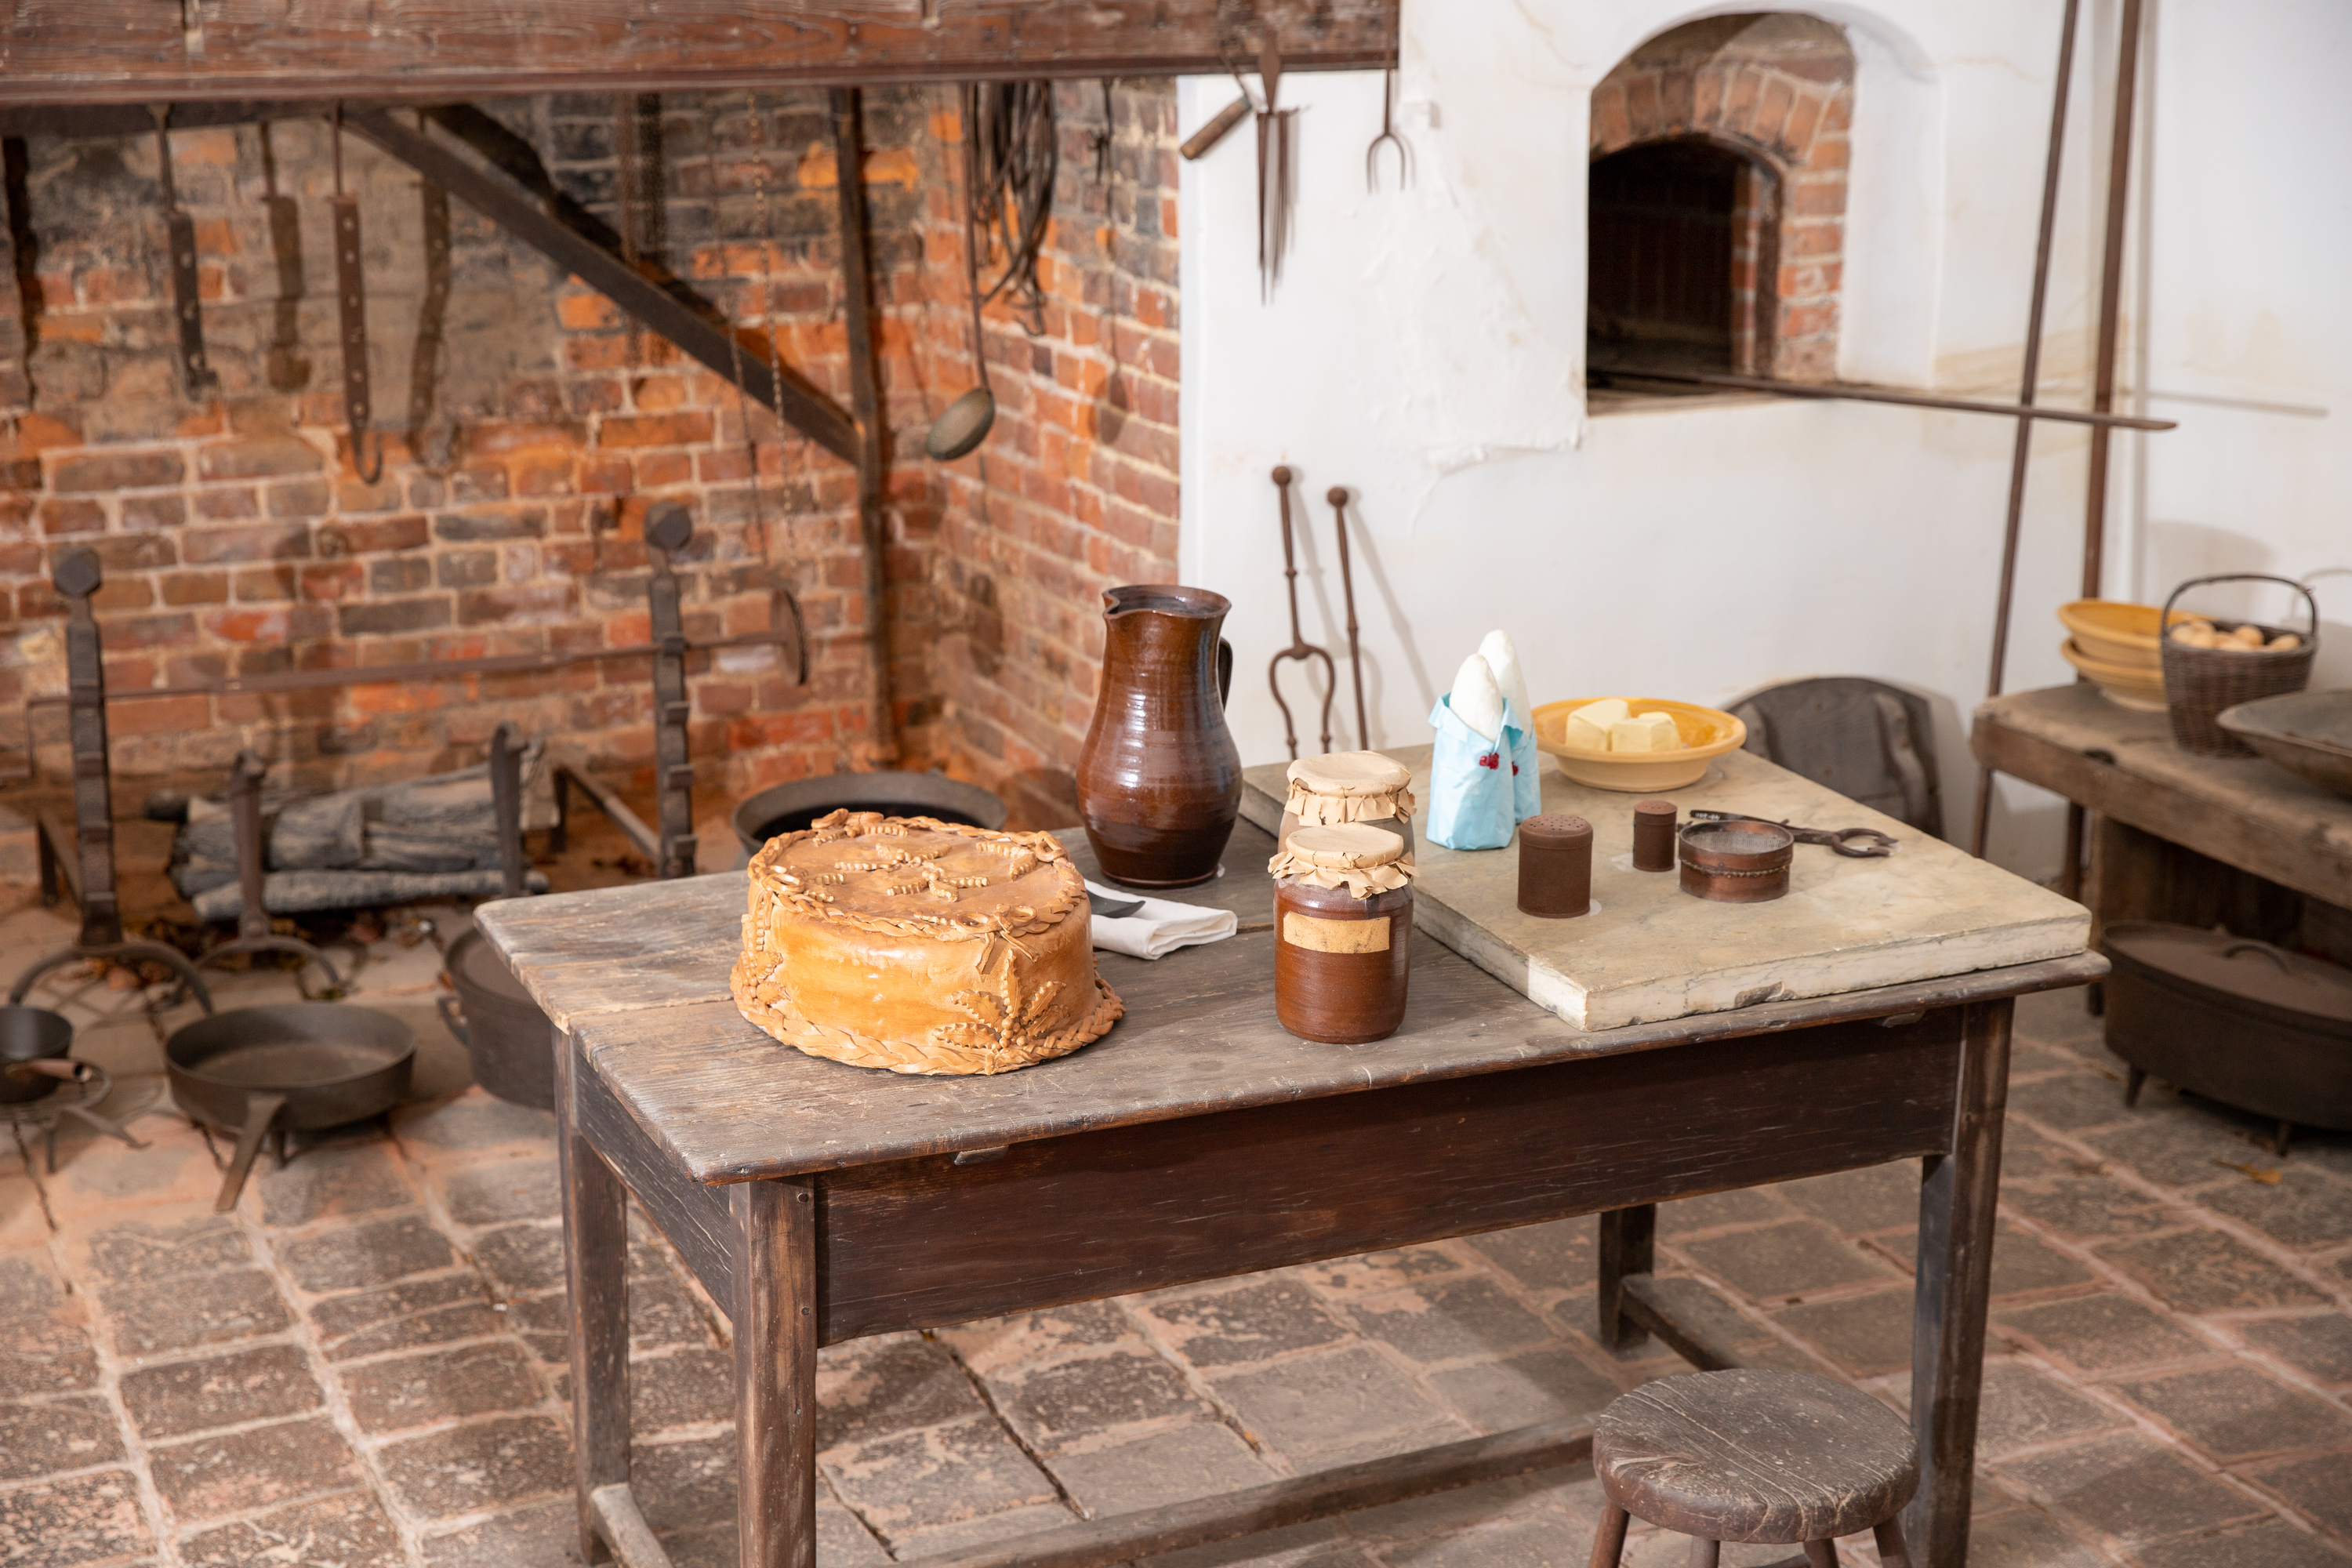 Farm to Table in the 18th Century